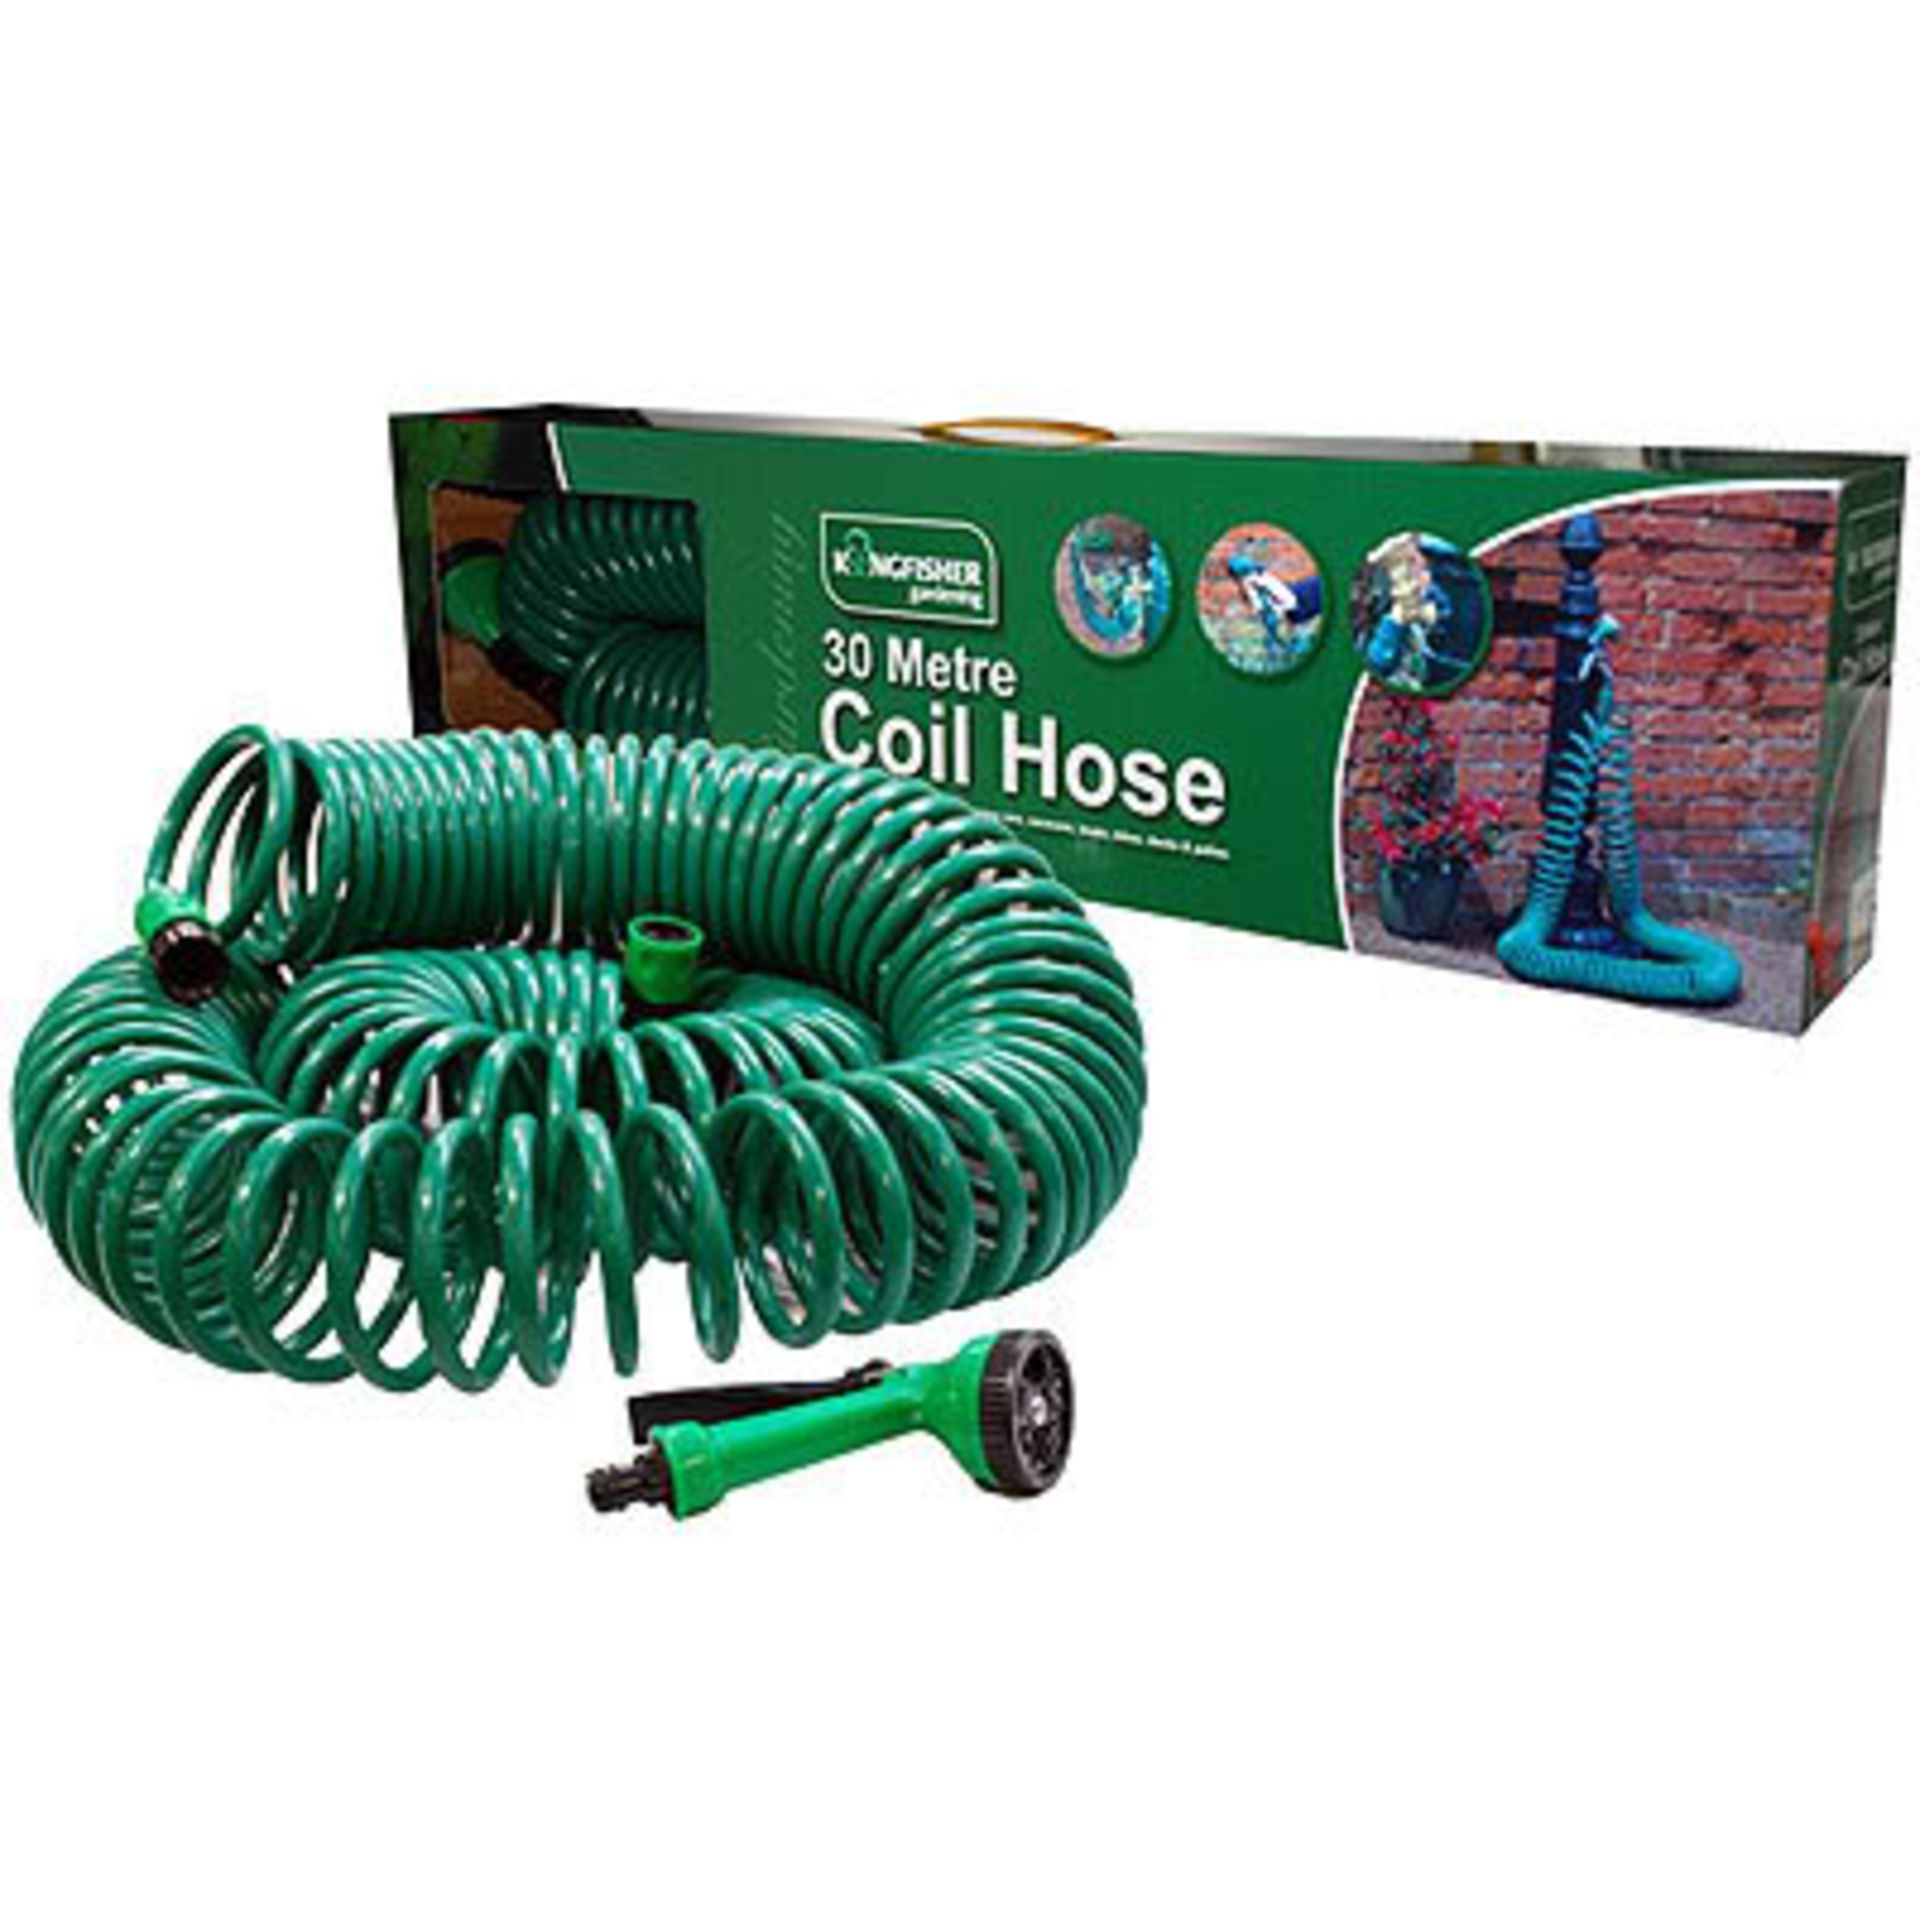 V *TRADE QTY* Brand New 30 Metre Coil Hose With Nozzle And Tap Connectors Etc X 20 Bid price to be